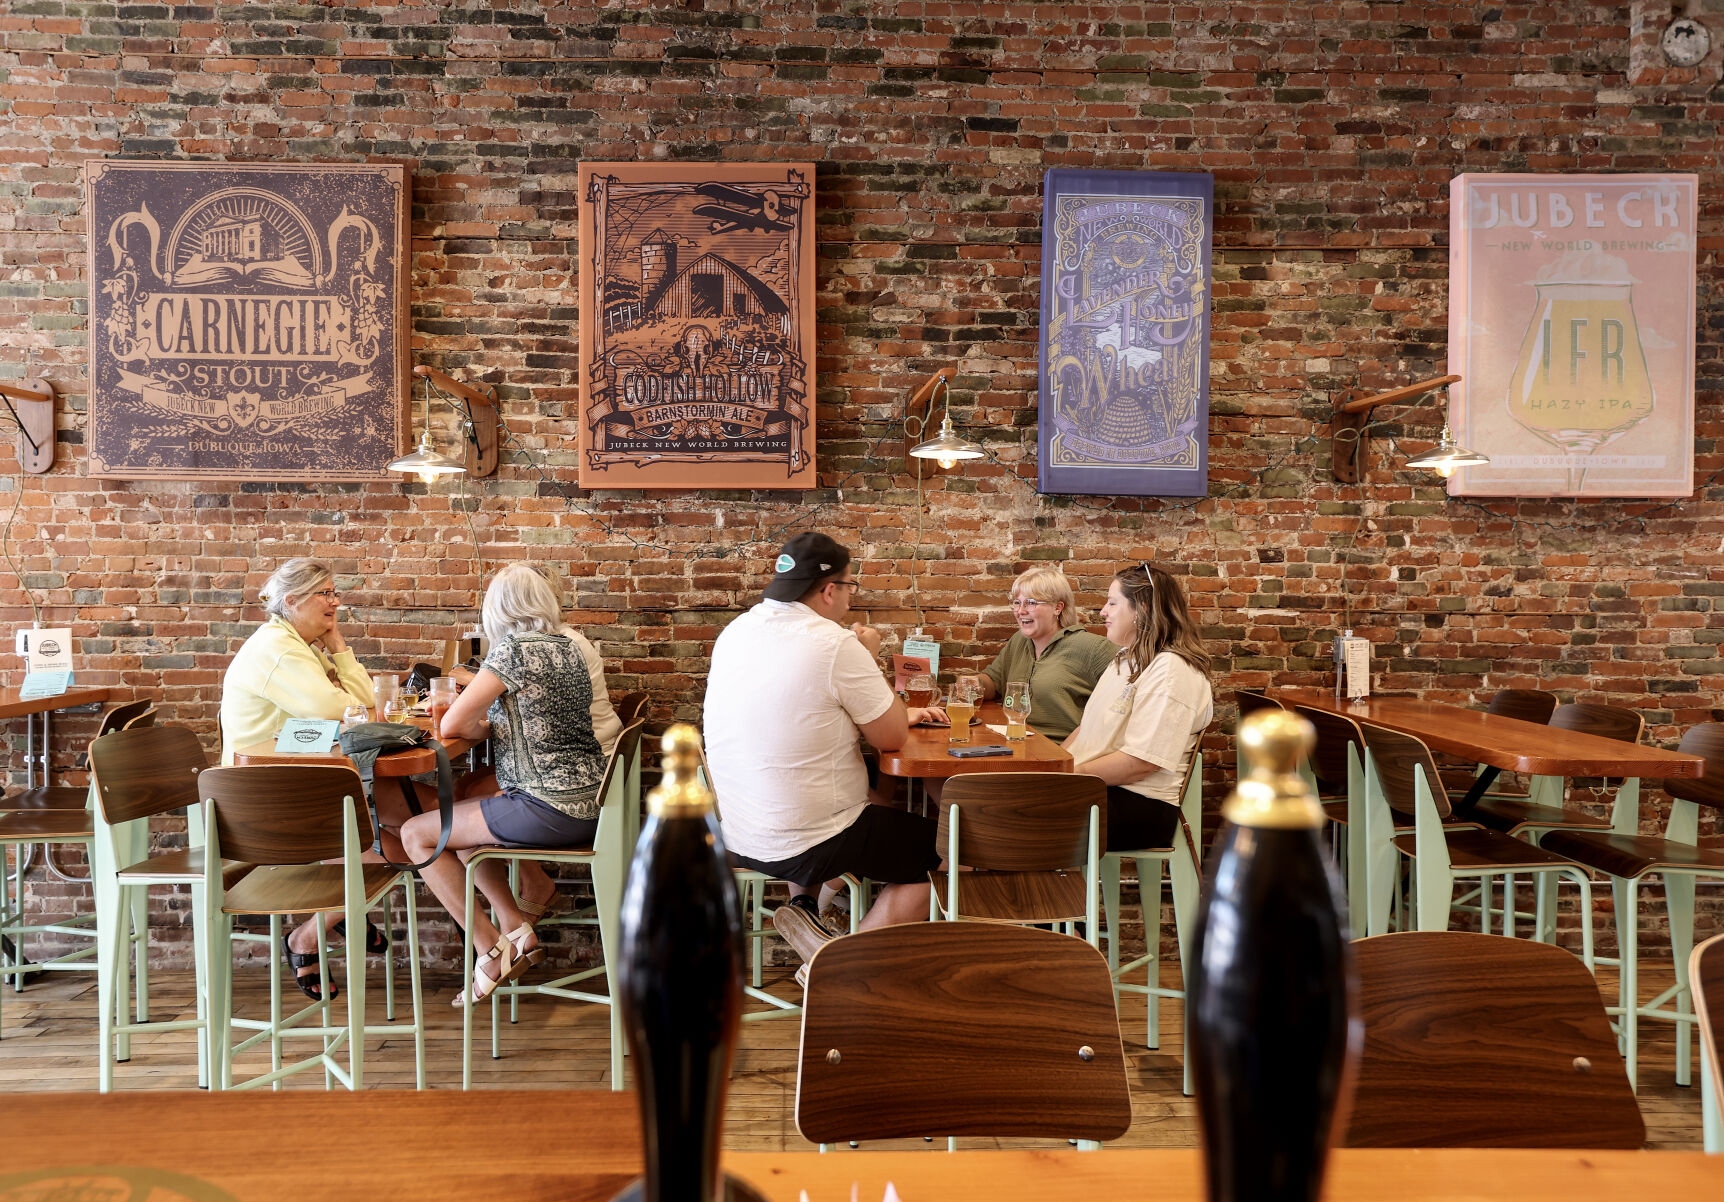 People chat inside Jubeck New World Brewing in Dubuque.    PHOTO CREDIT: Dave Kettering Telegraph Herald